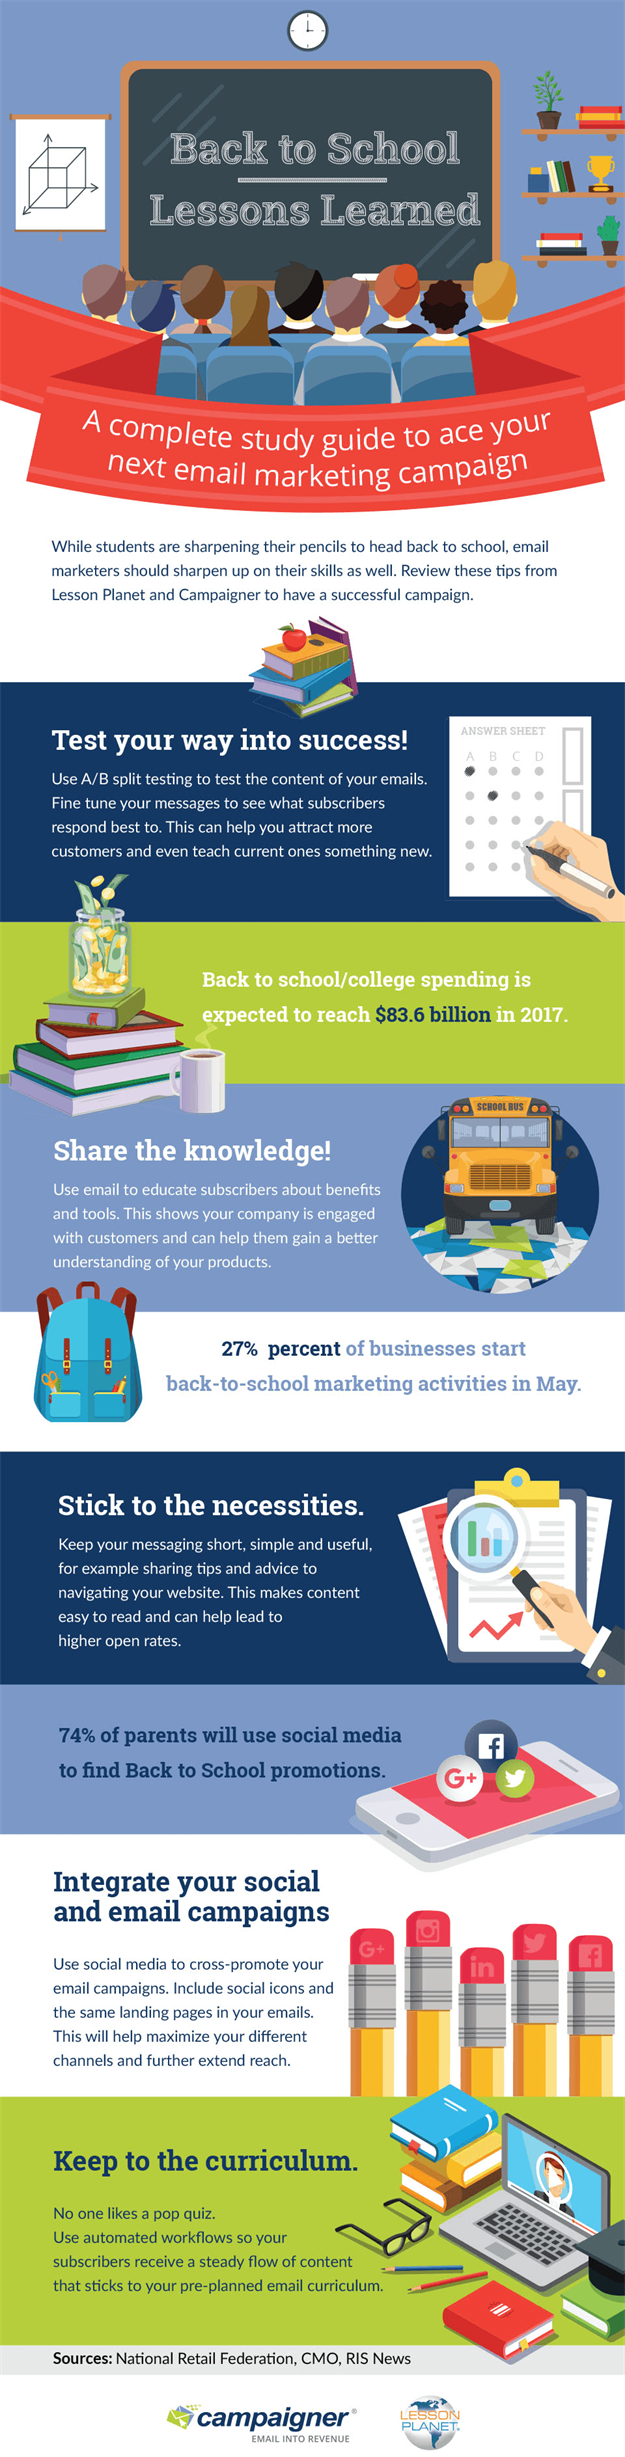 Campaigner-Back-to-School-Infographic_081717_FINAL